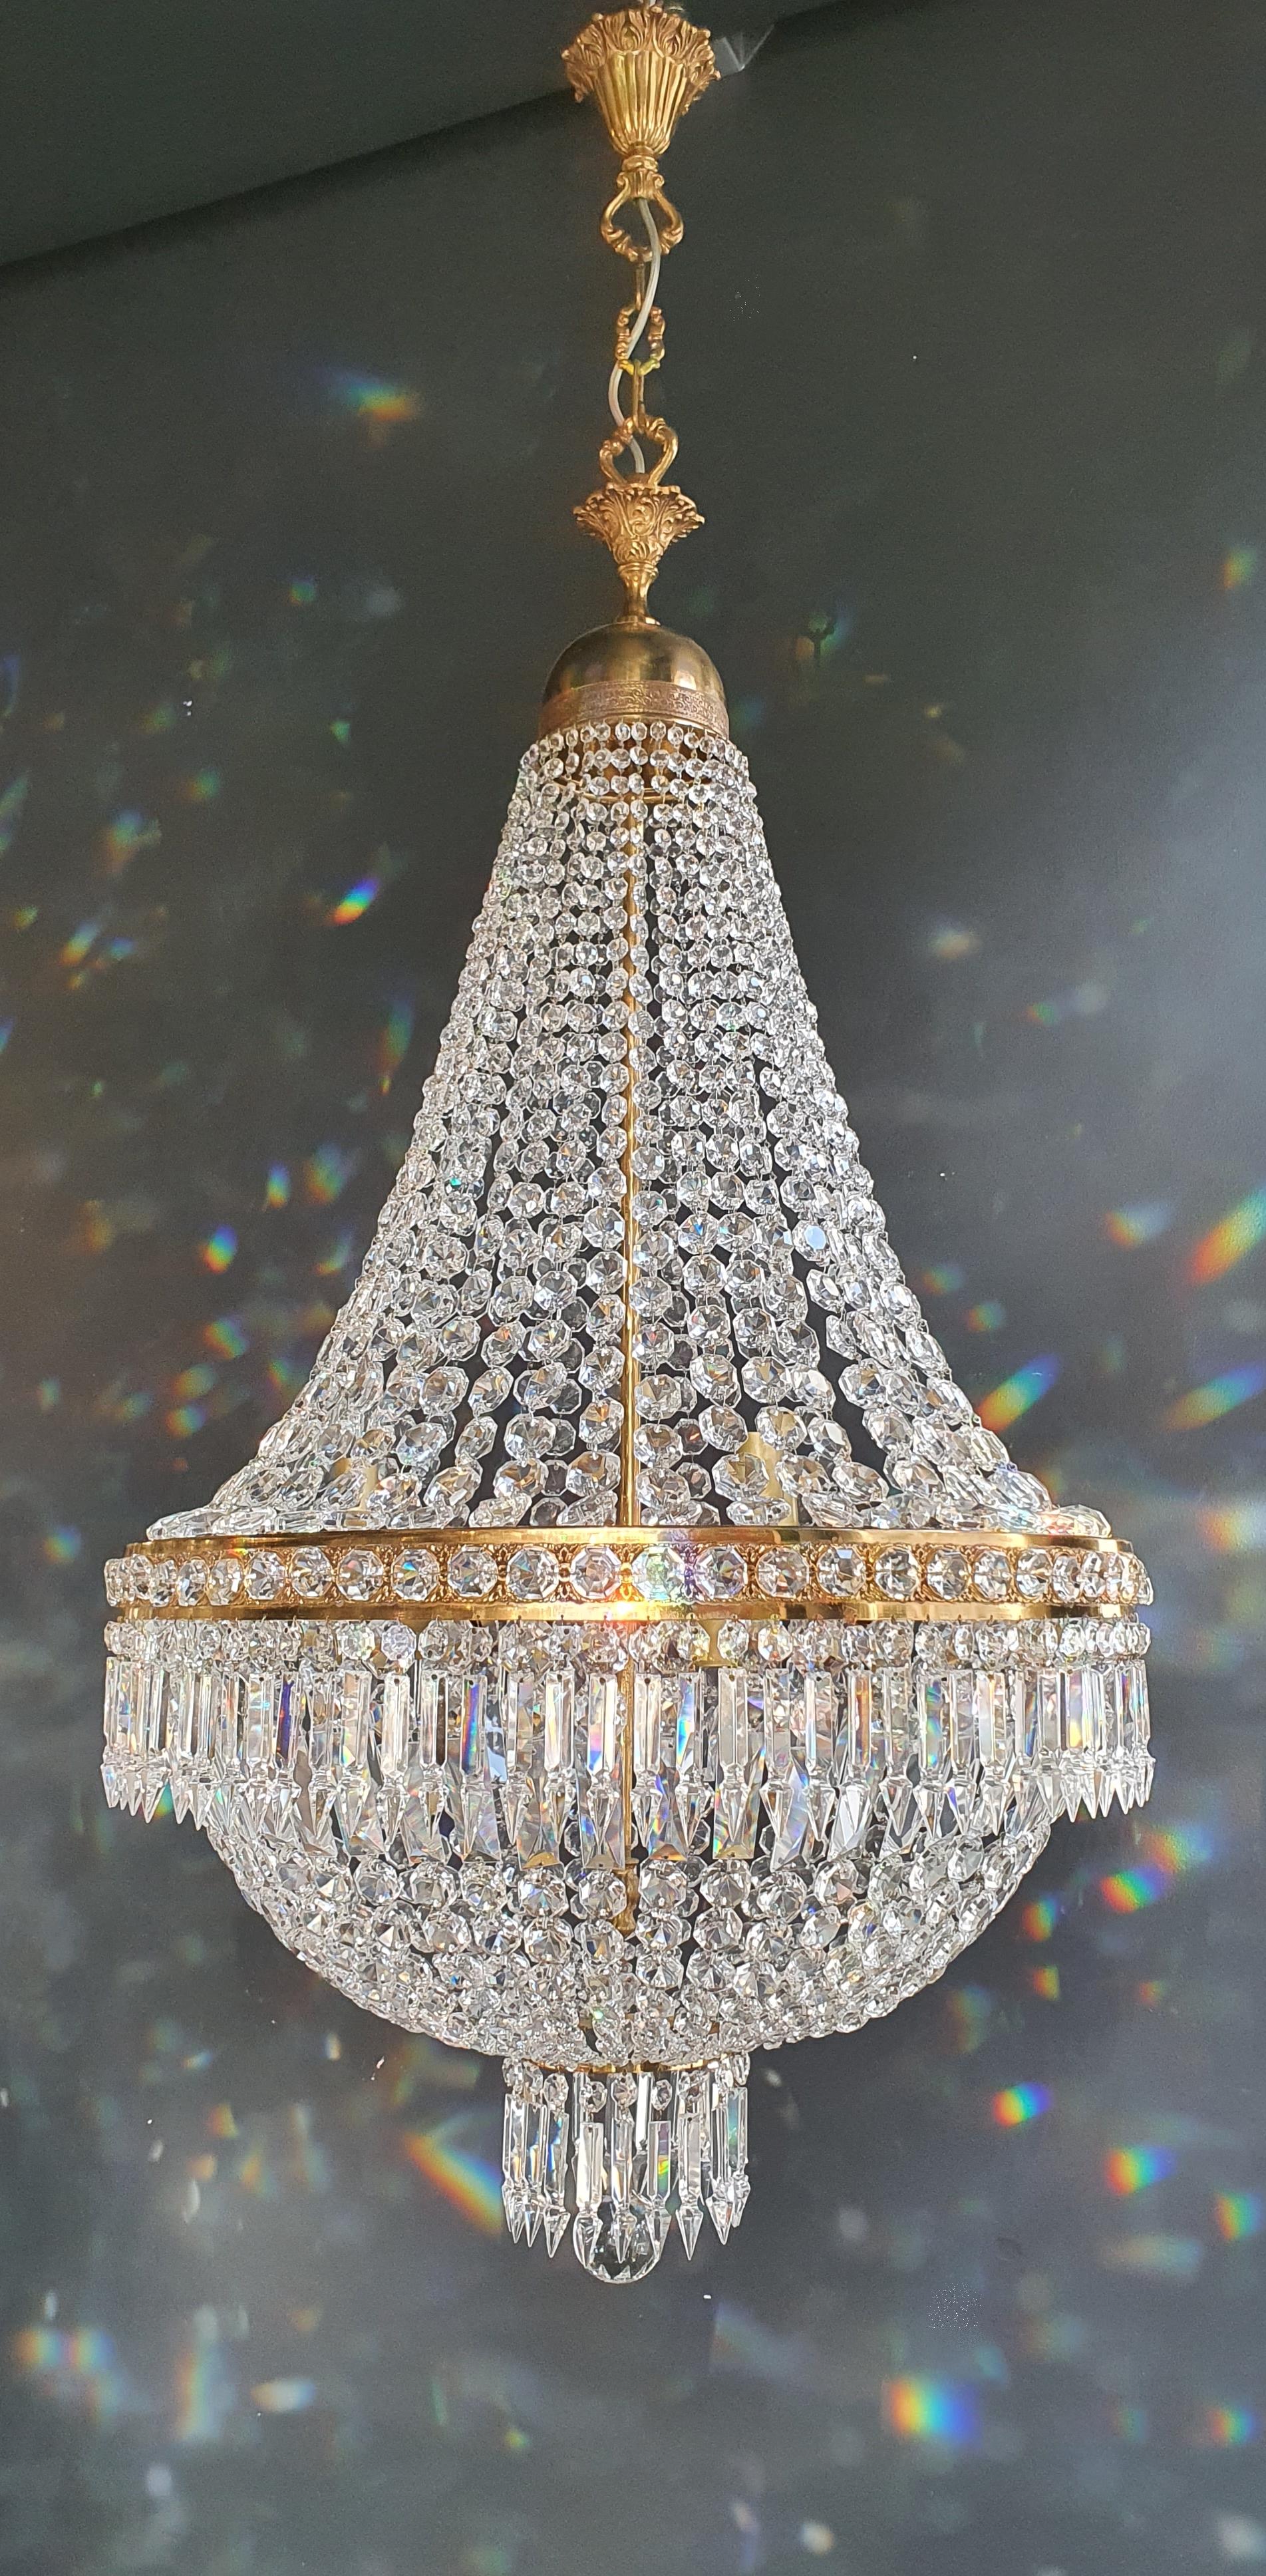 Mid-20th Century Montgolfiè Empire Brass Sac a Pearl Chandelier Crystal Lustre Ceiling Antique